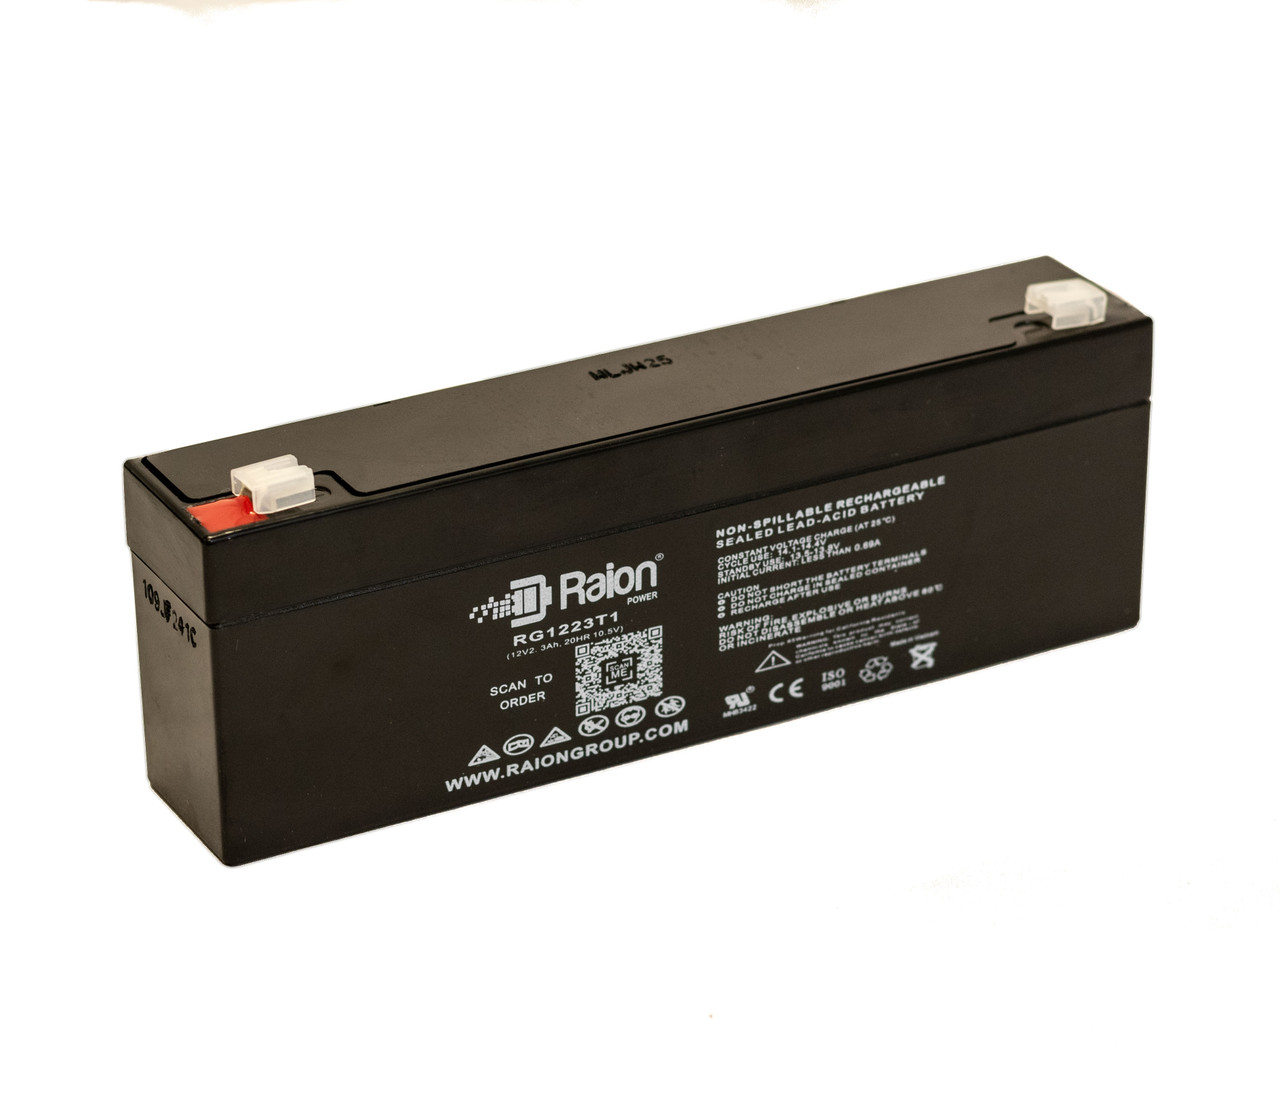 Raion Power RG1223T1 Replacement Battery for Invivo Research Inc. 4500 Plus MRI